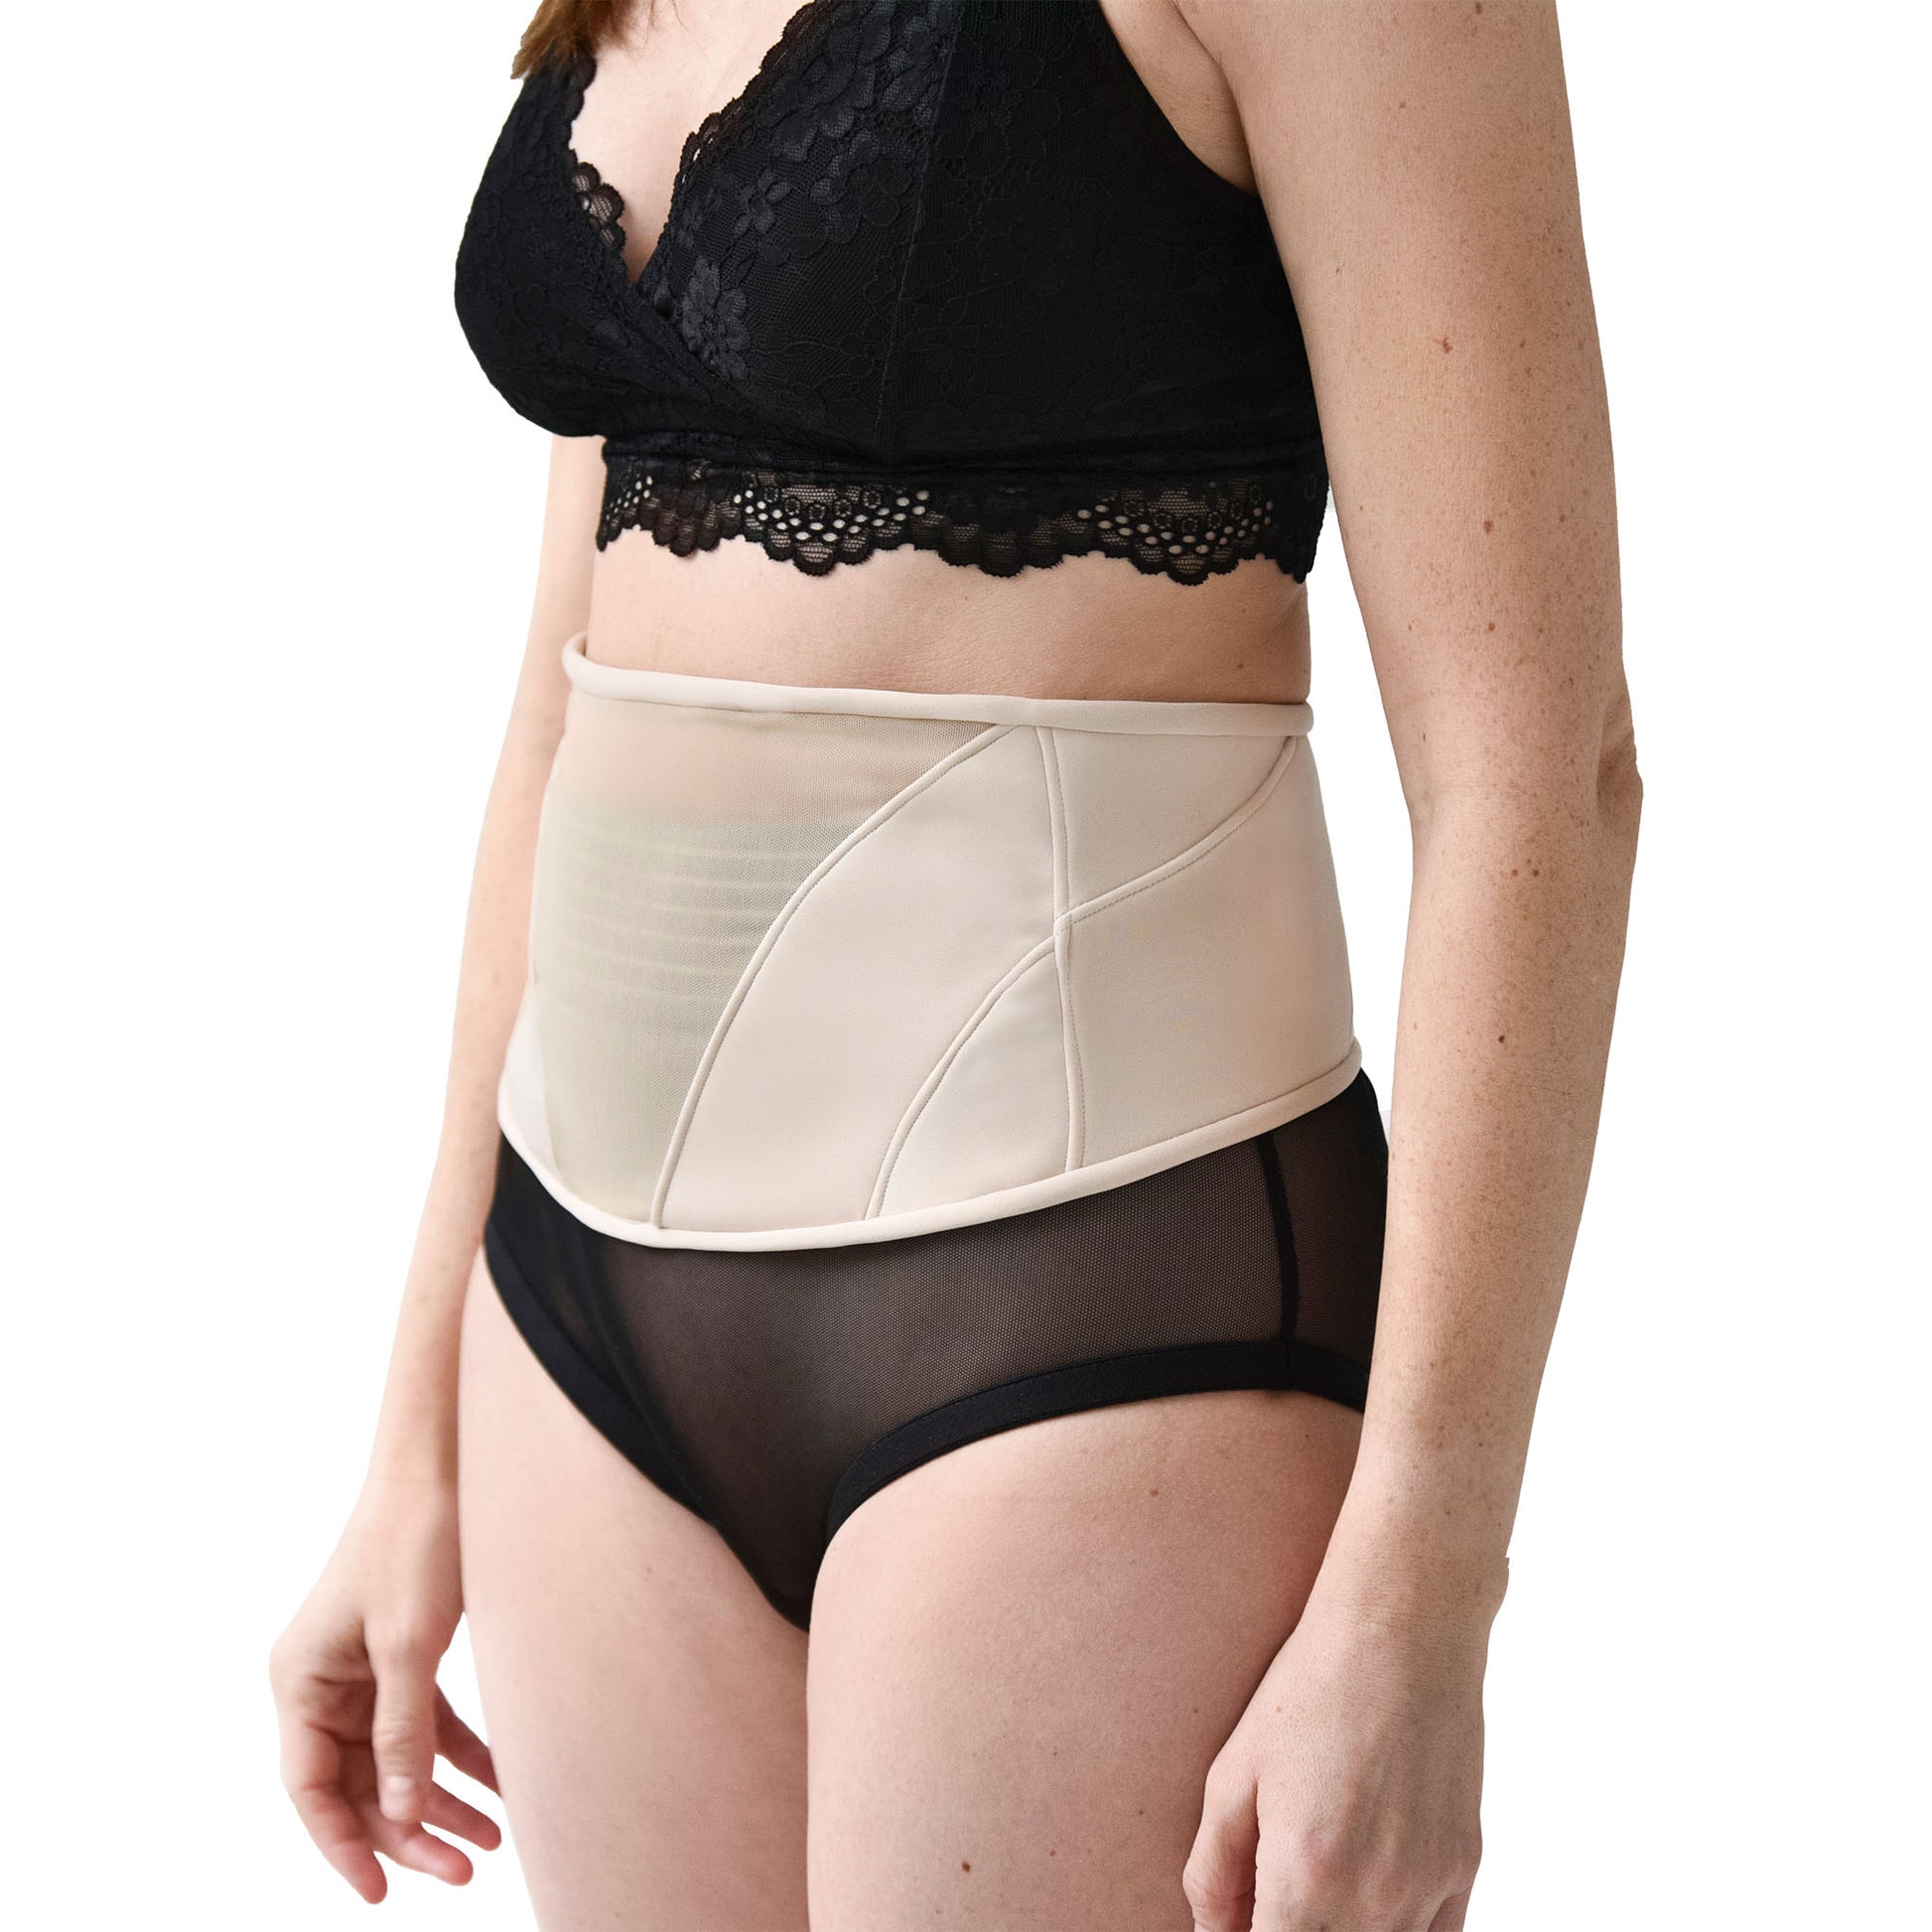 Belly binding made easy